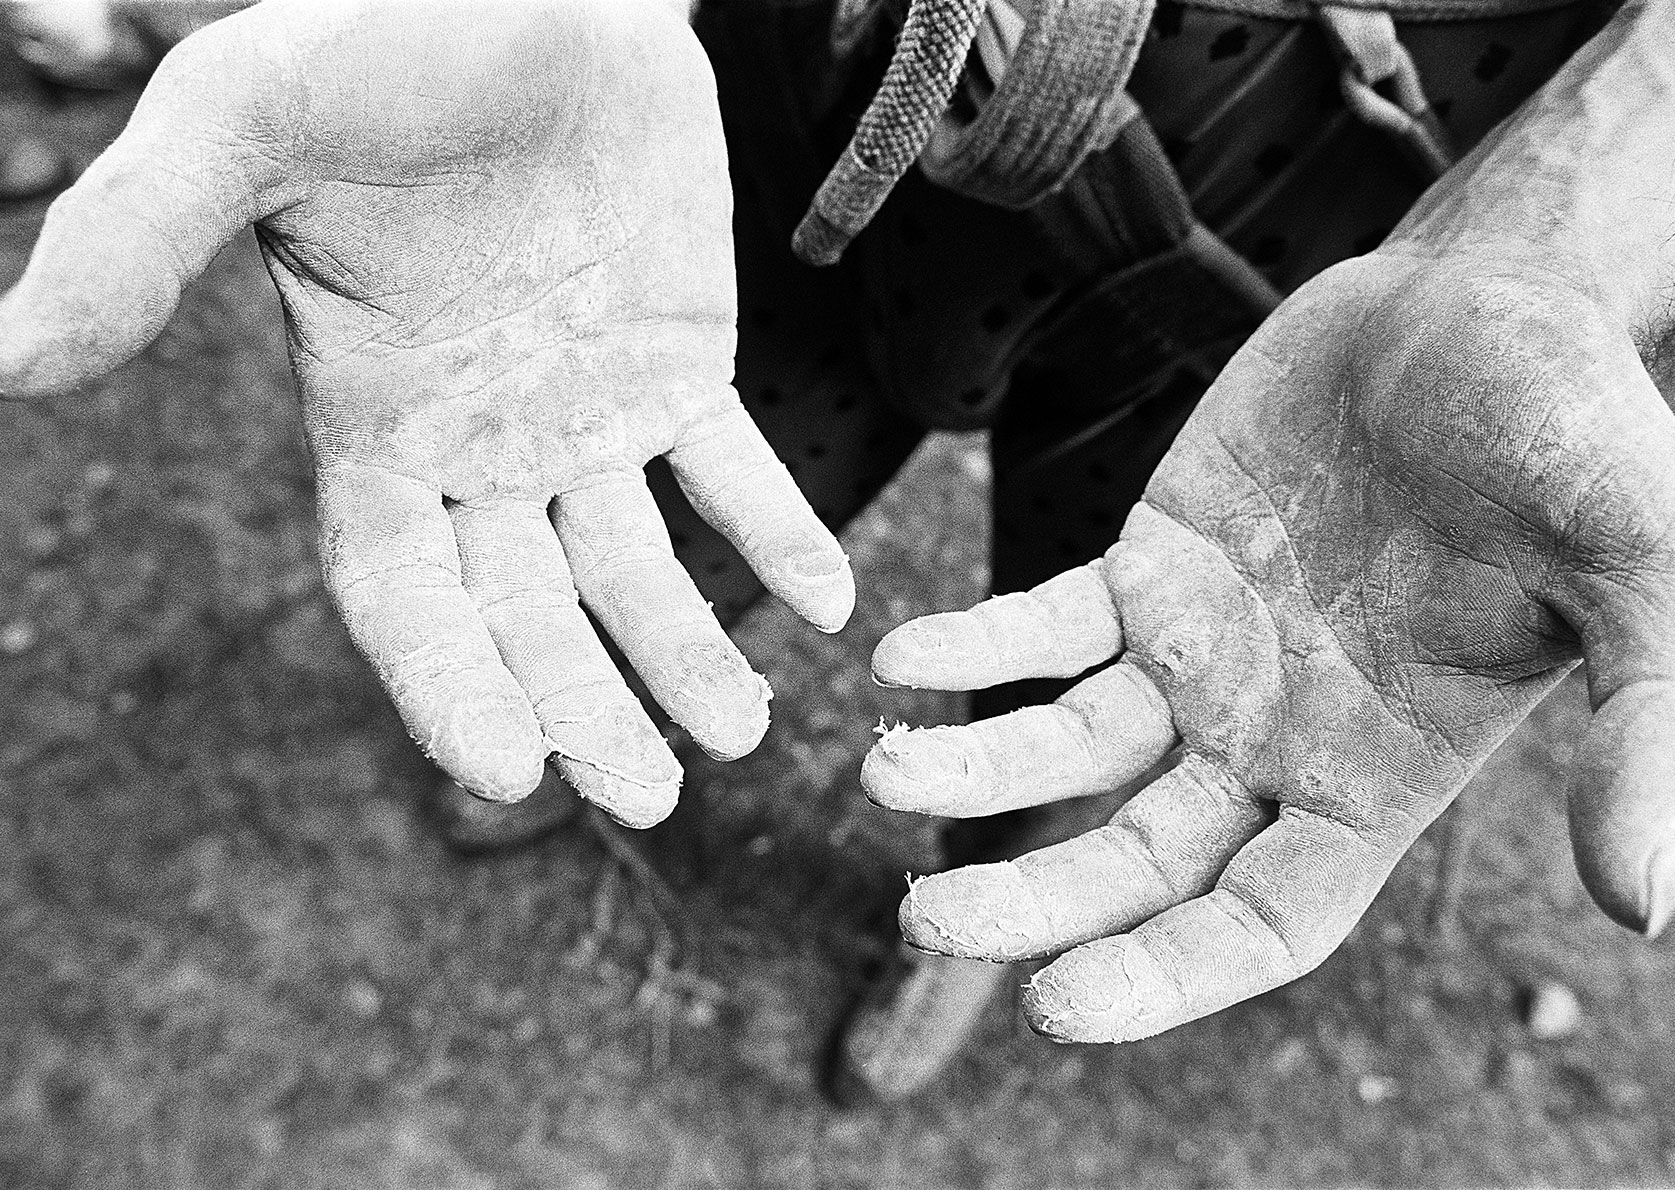 A climber’s hands showing damaged skin